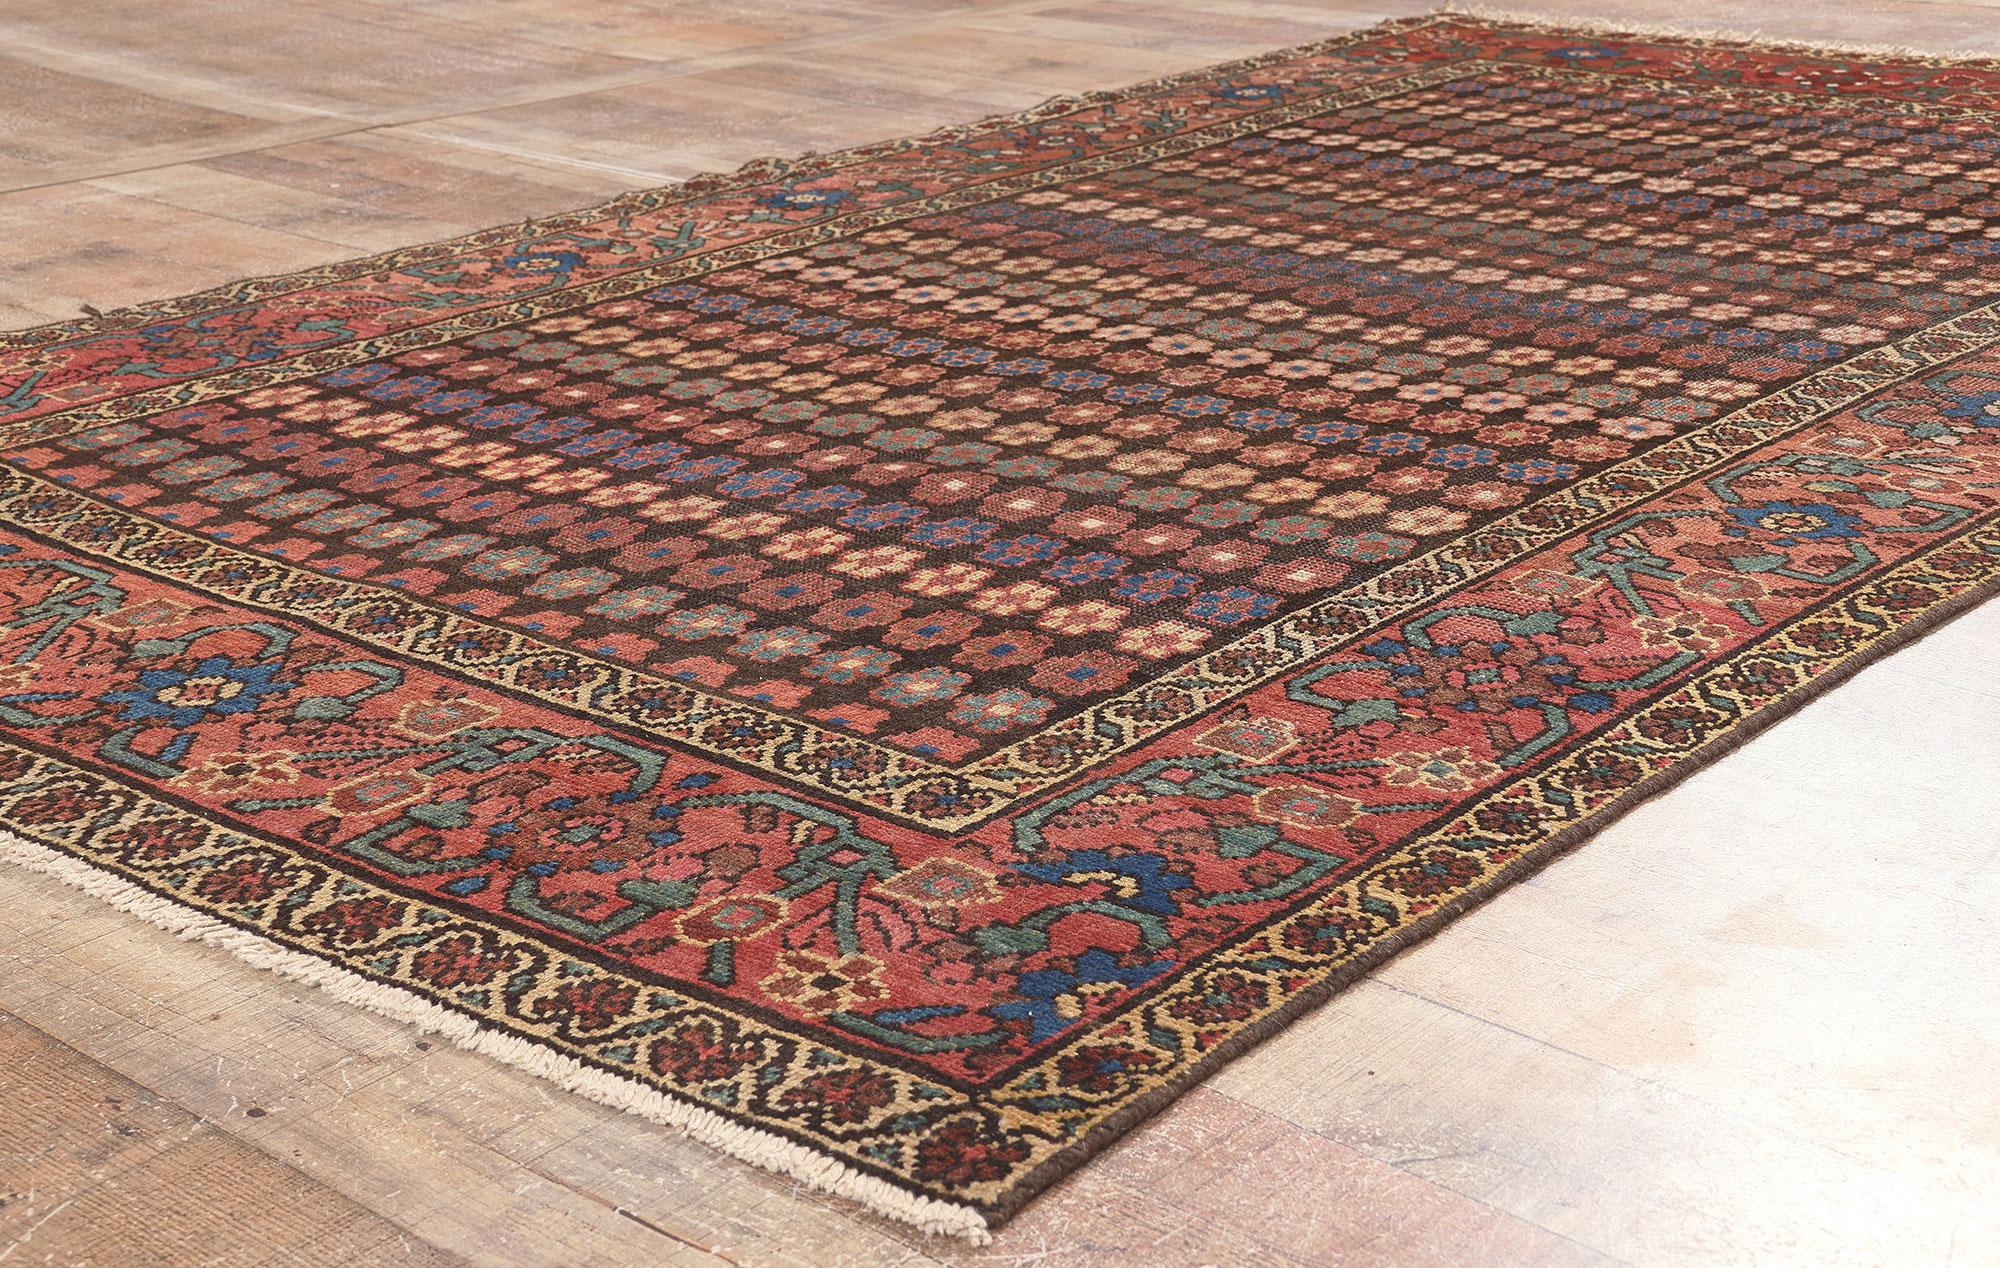 Antique Persian Hamadan Rug, Earth-Tone Elegance Meets Flower Power In Good Condition For Sale In Dallas, TX